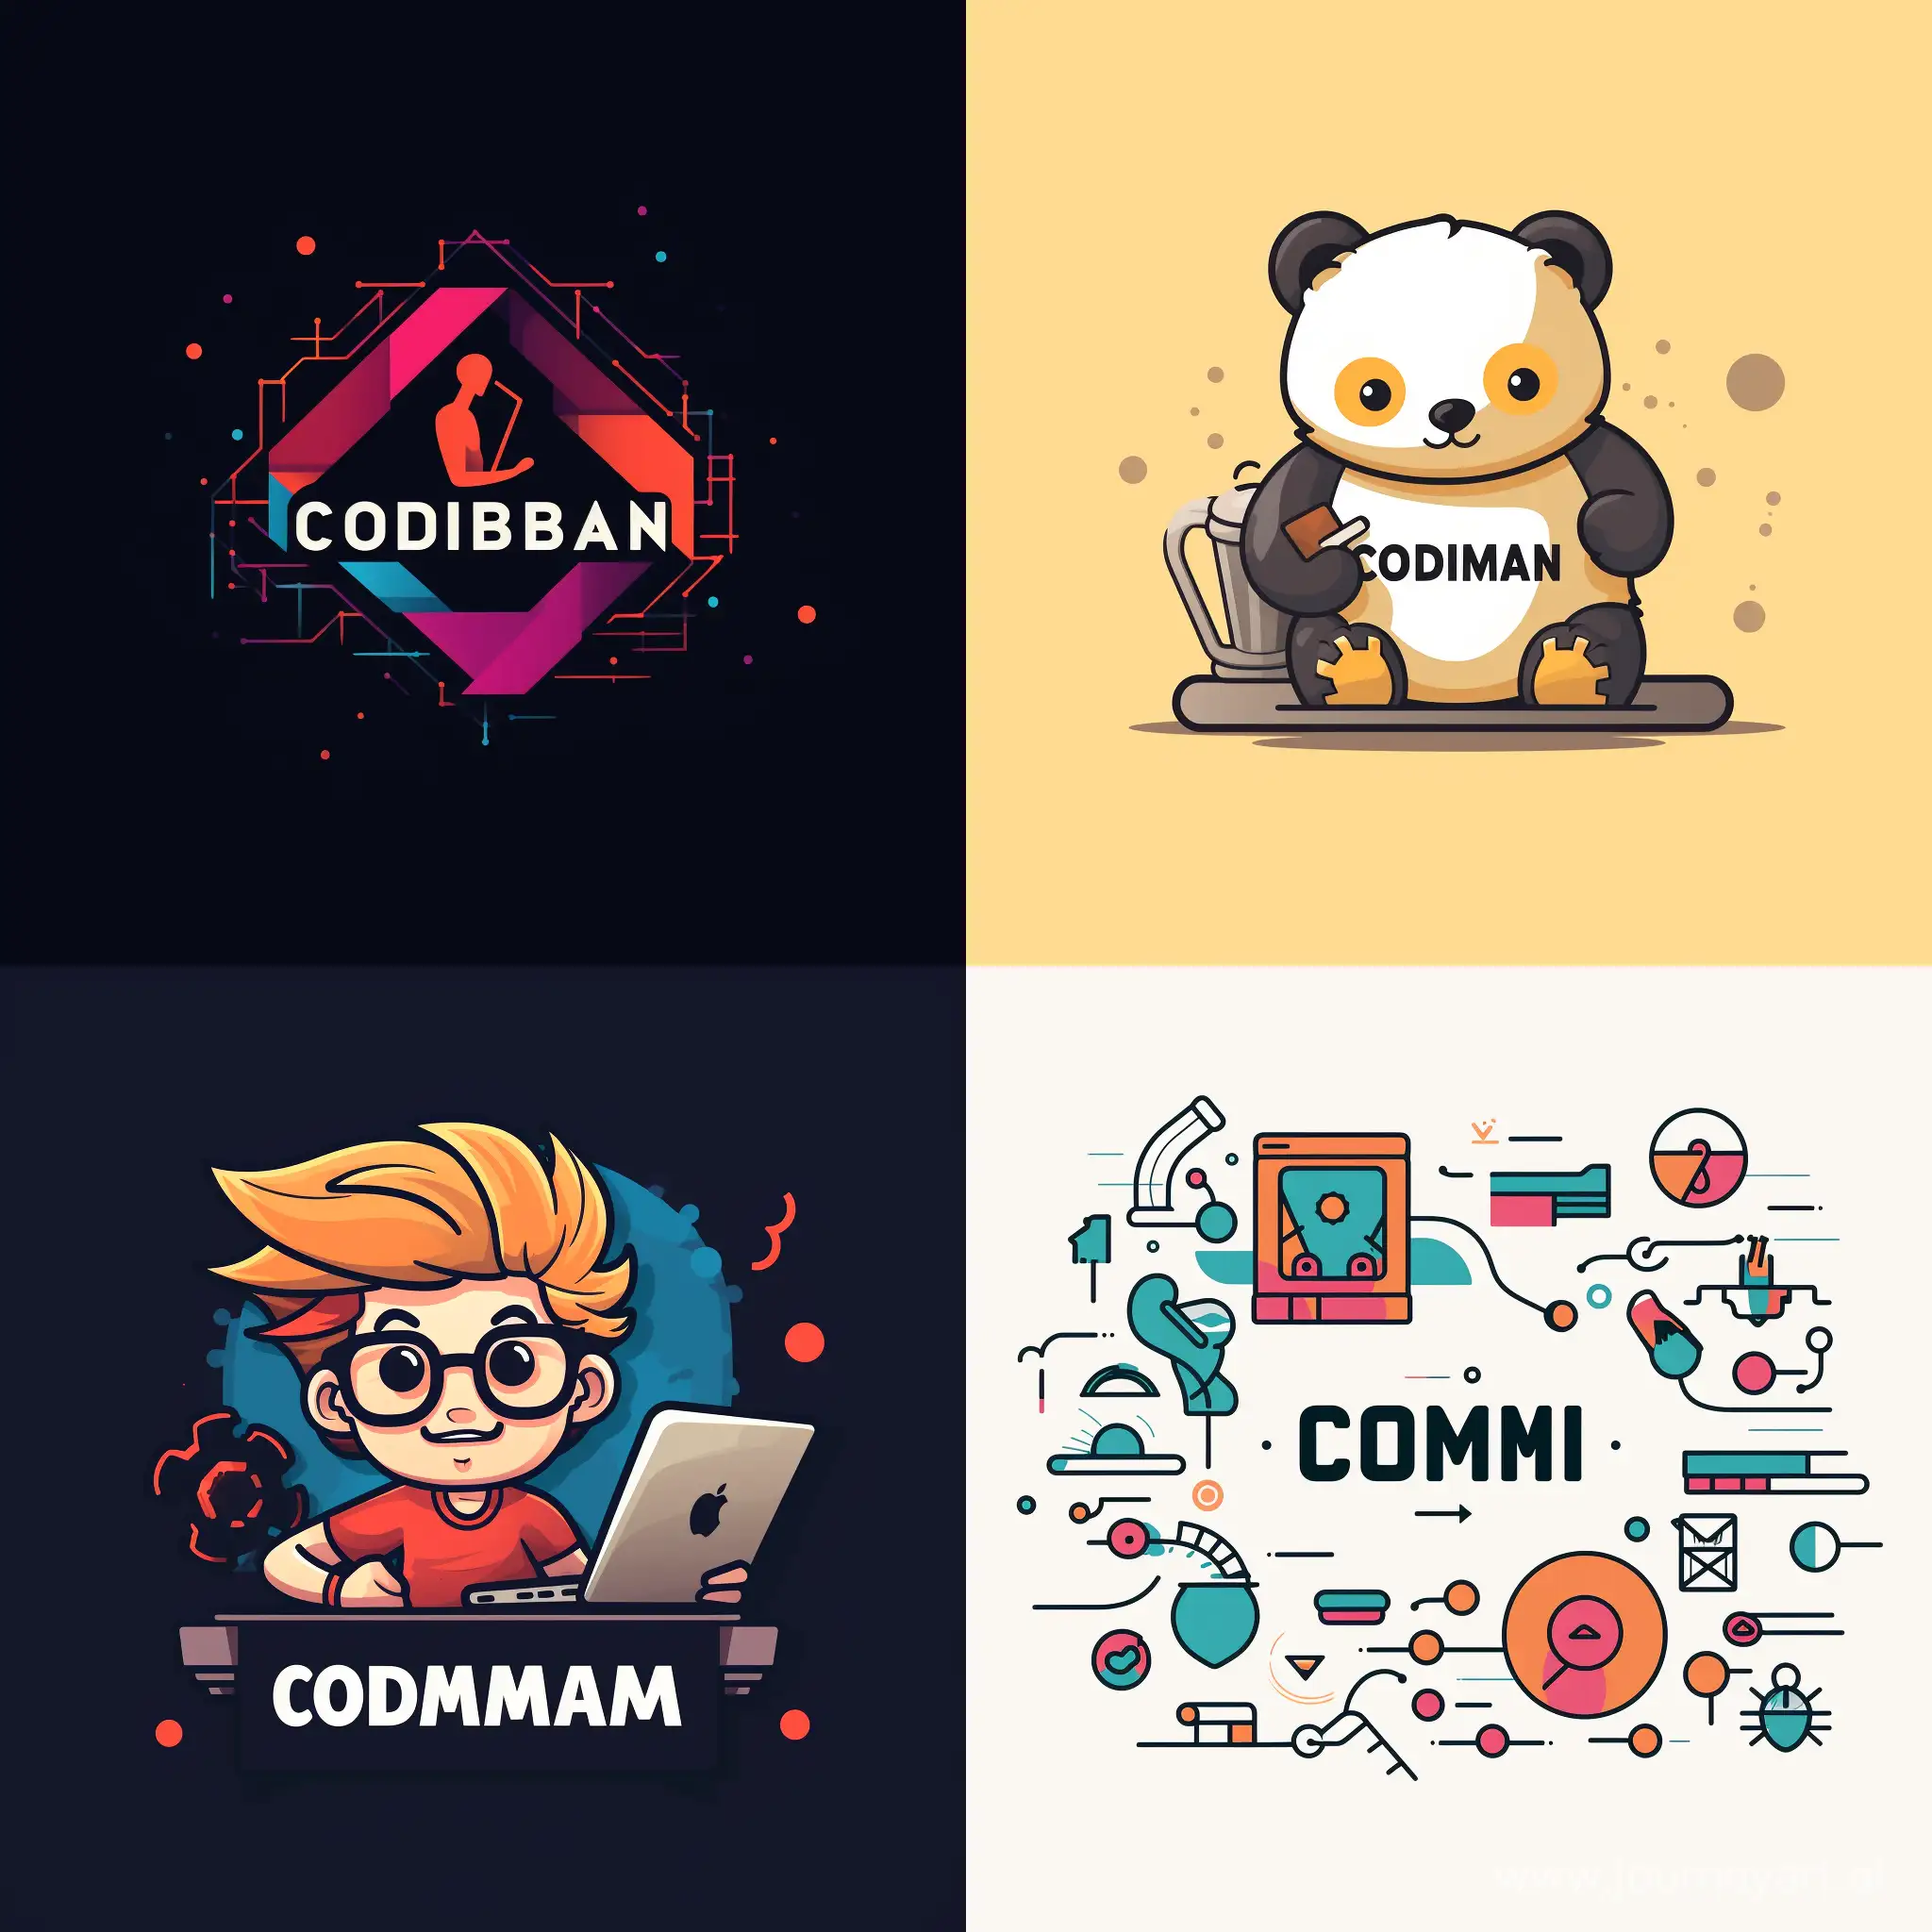 A logo for a company that names Codamin and they are the best web developers and web designers in the world